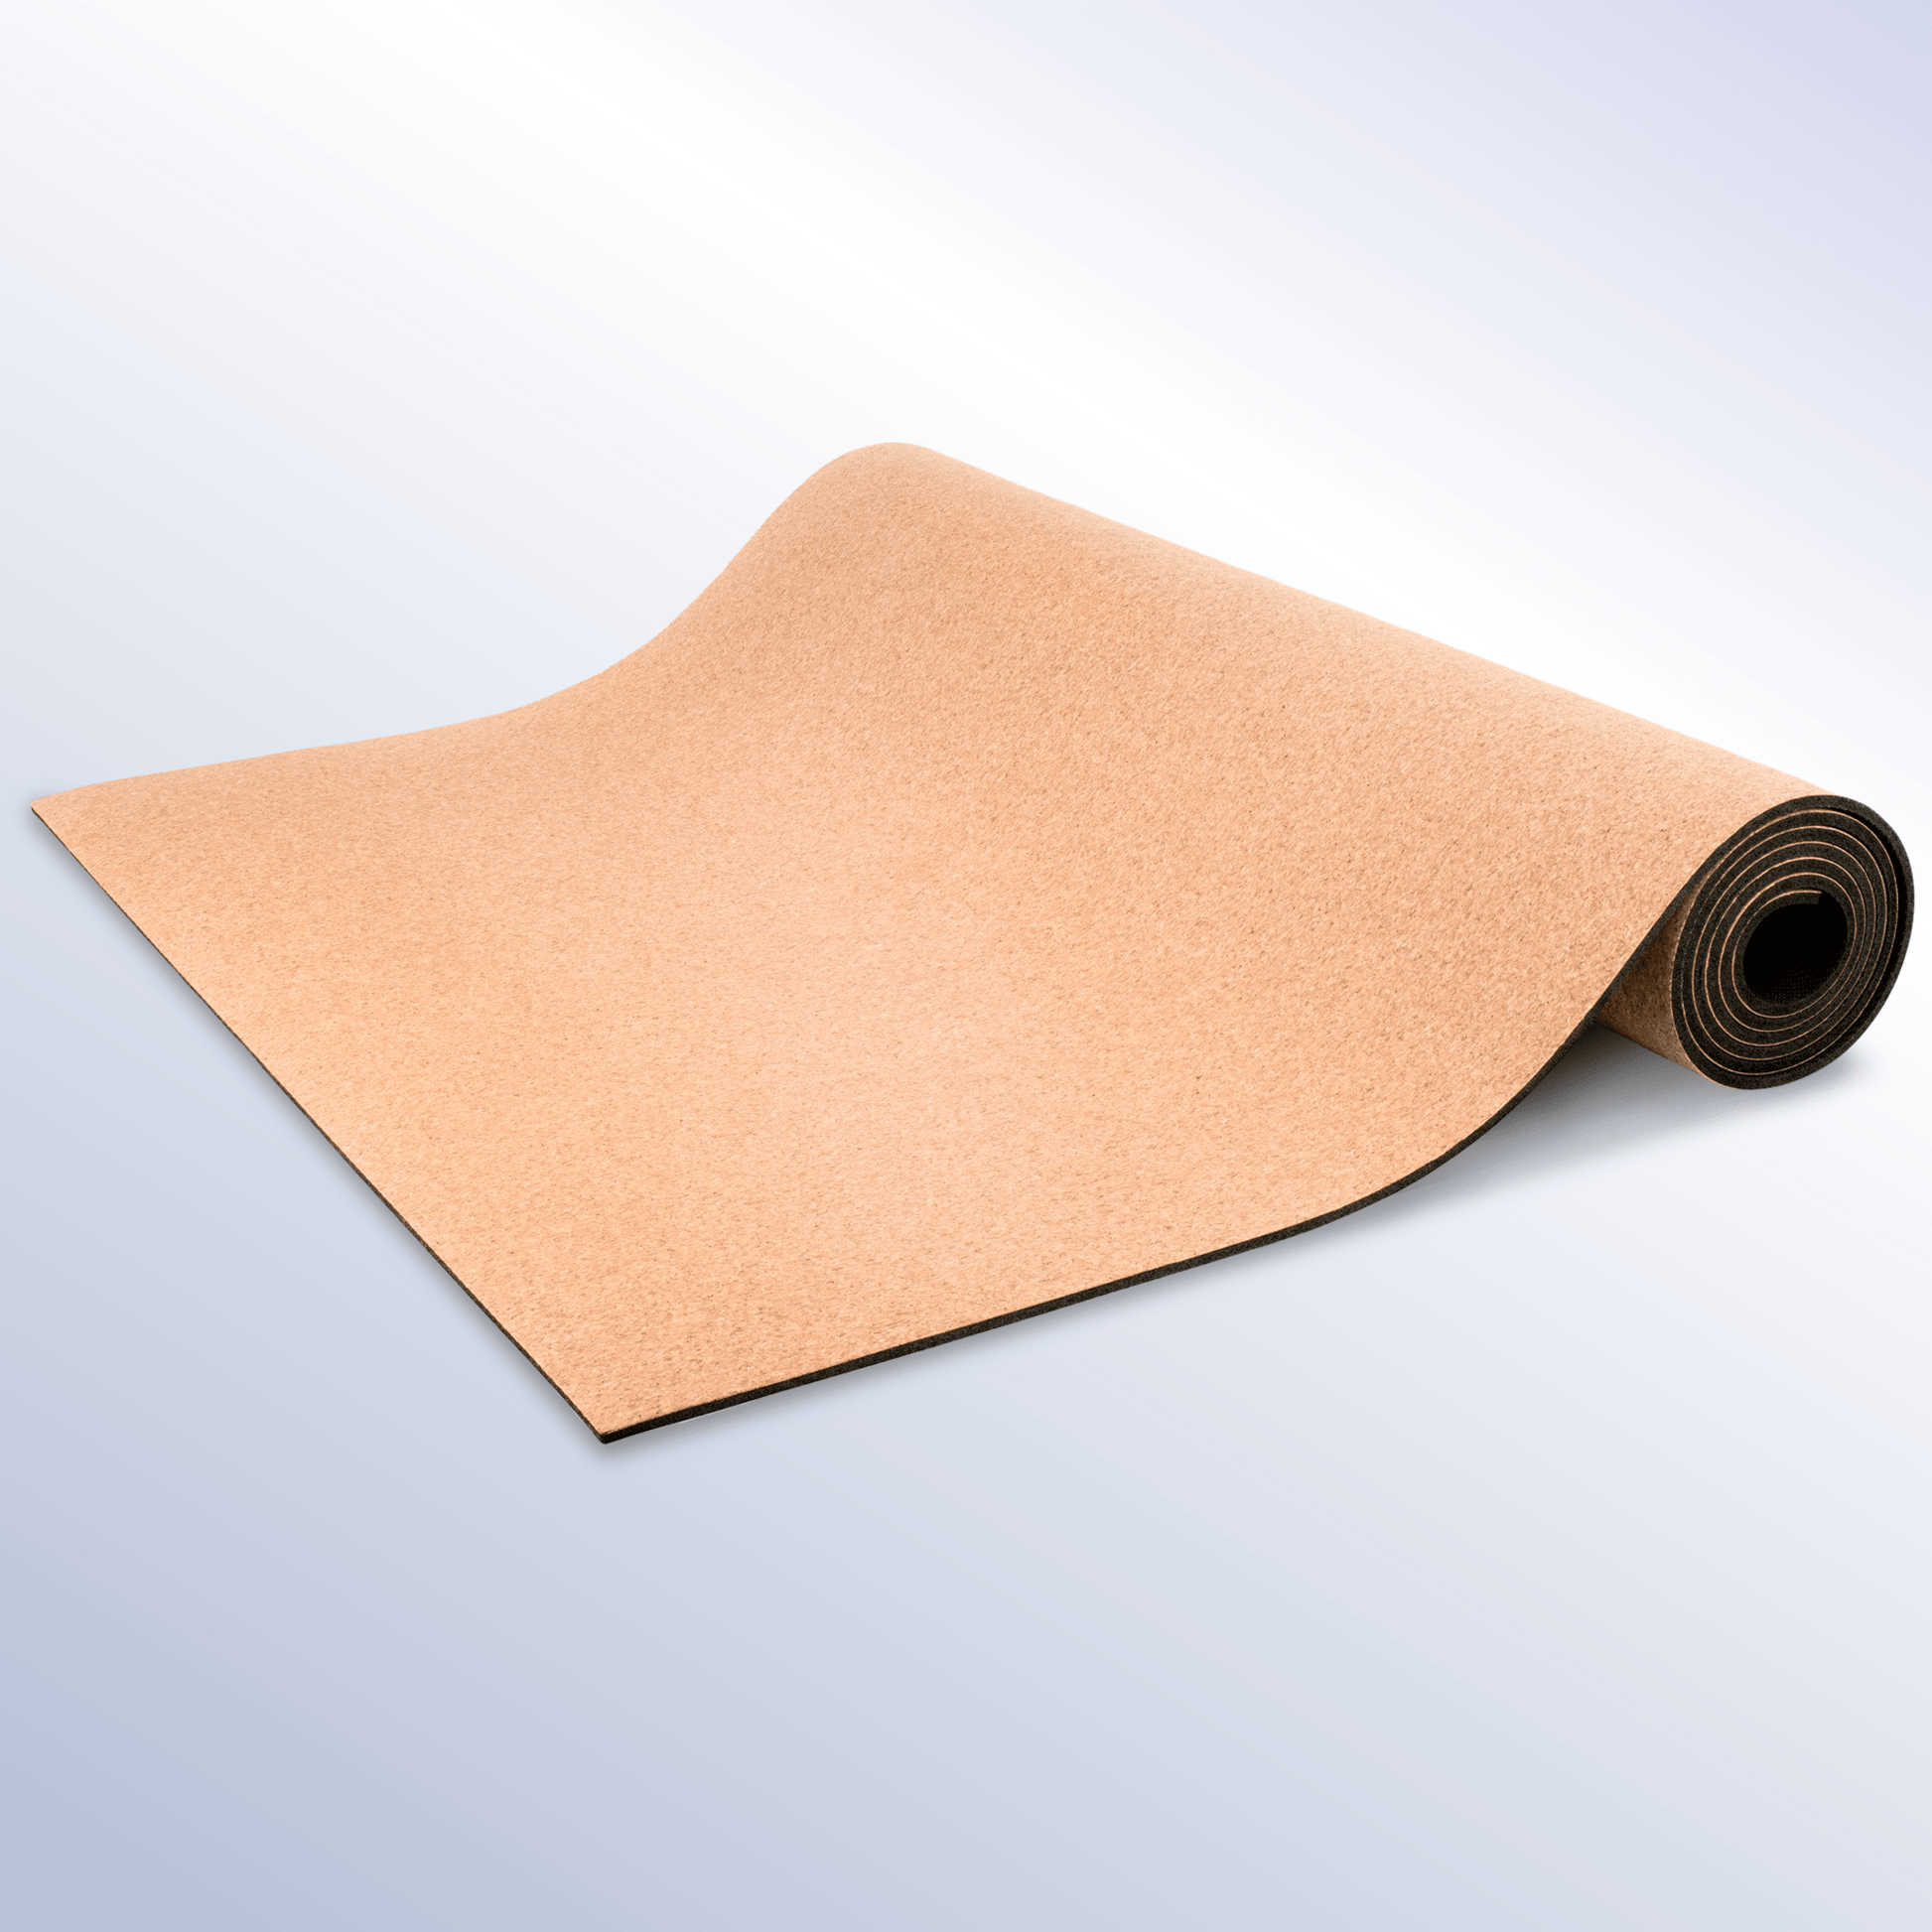 Large Cork Yoga Mat - More Space To Practice